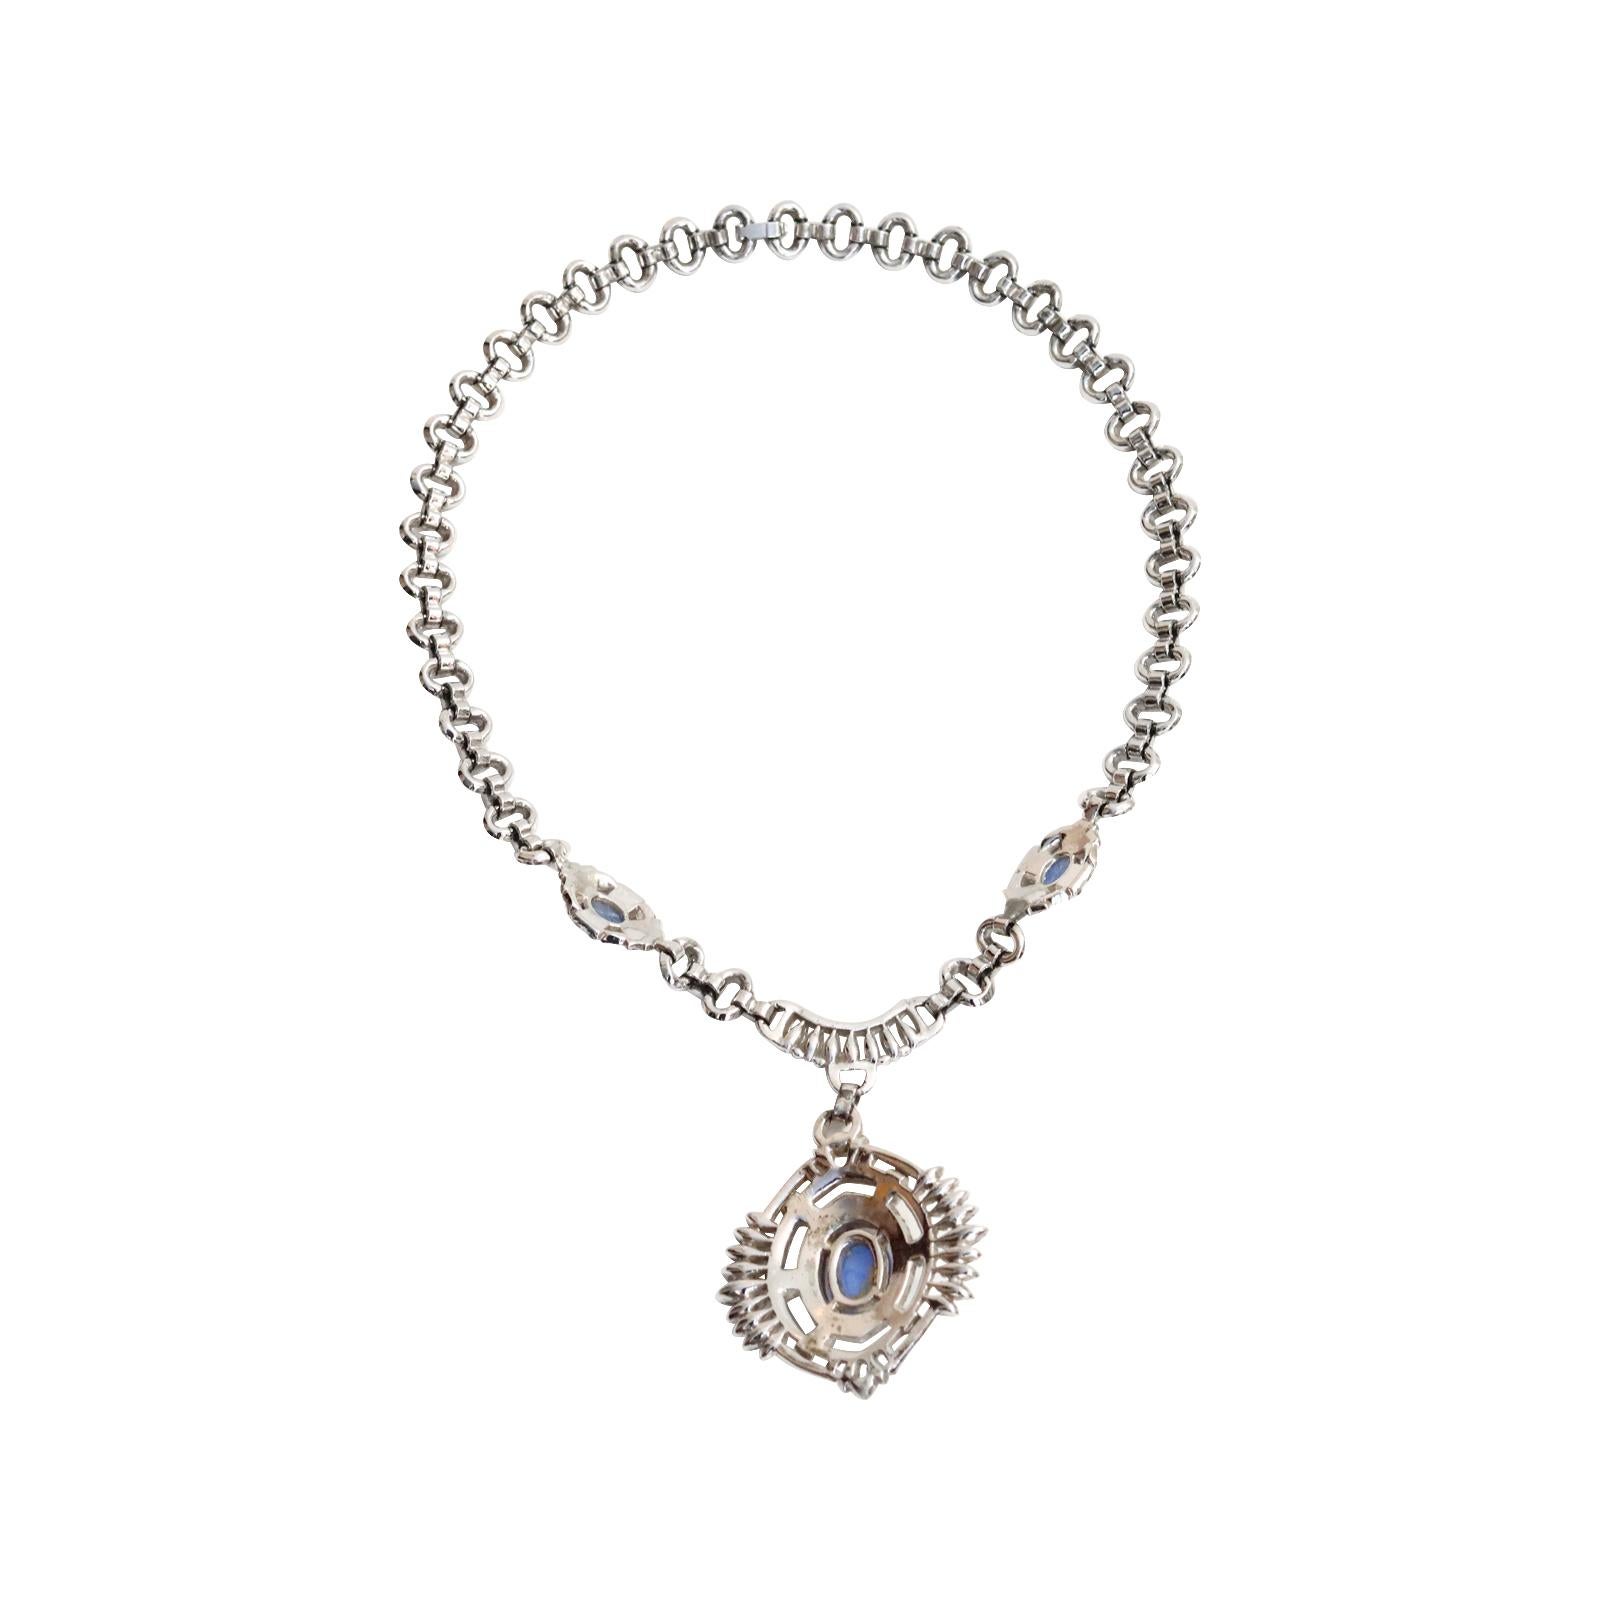 Modern Vintage Diamante with Blue Shiny Cabochon Dangling Pendant Necklace, circa 1960s For Sale